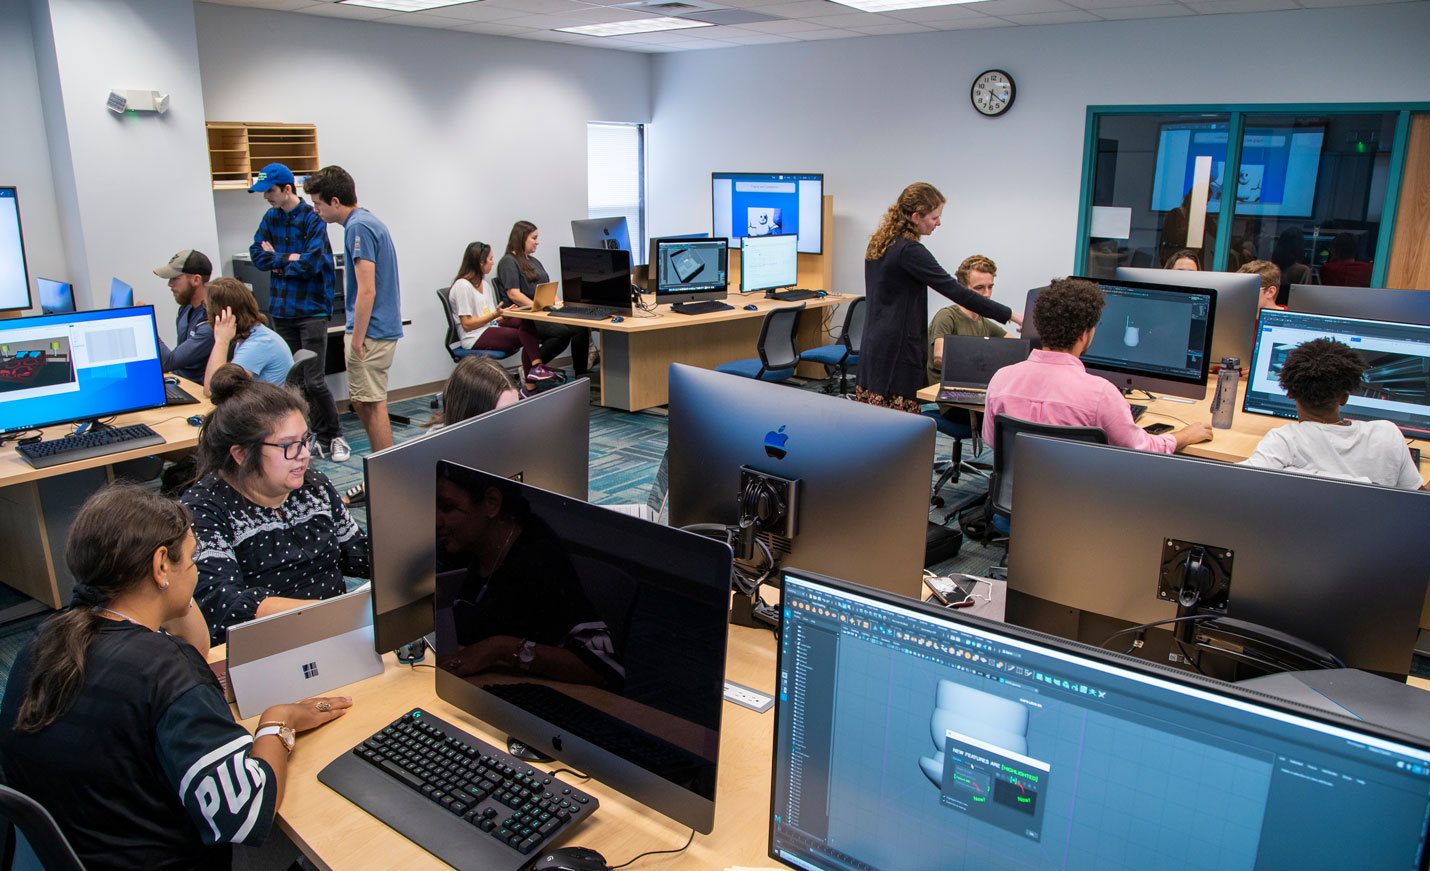 A class of students in a digital arts lab; an instructor is assisting one student